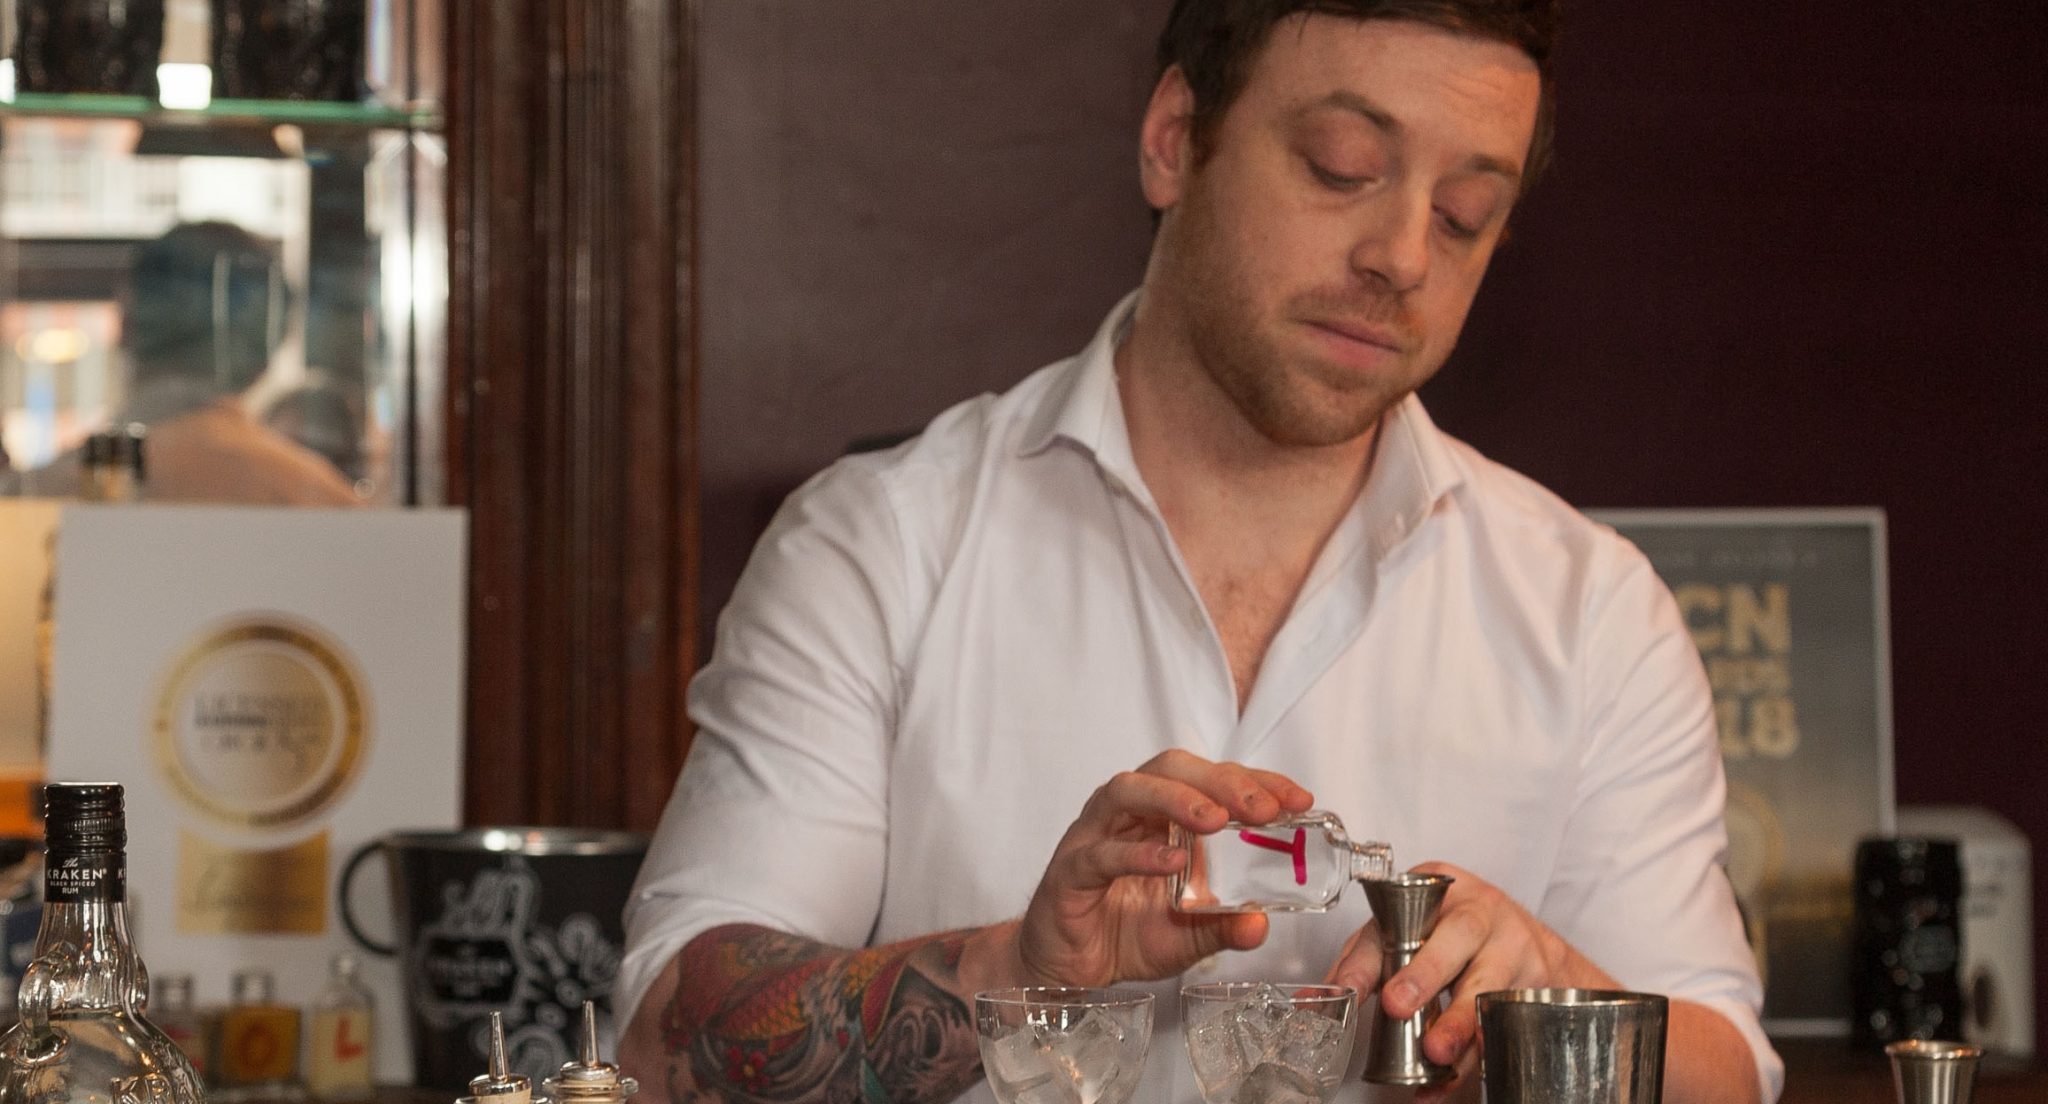 Entries sought for Mixologist of the Year 2019